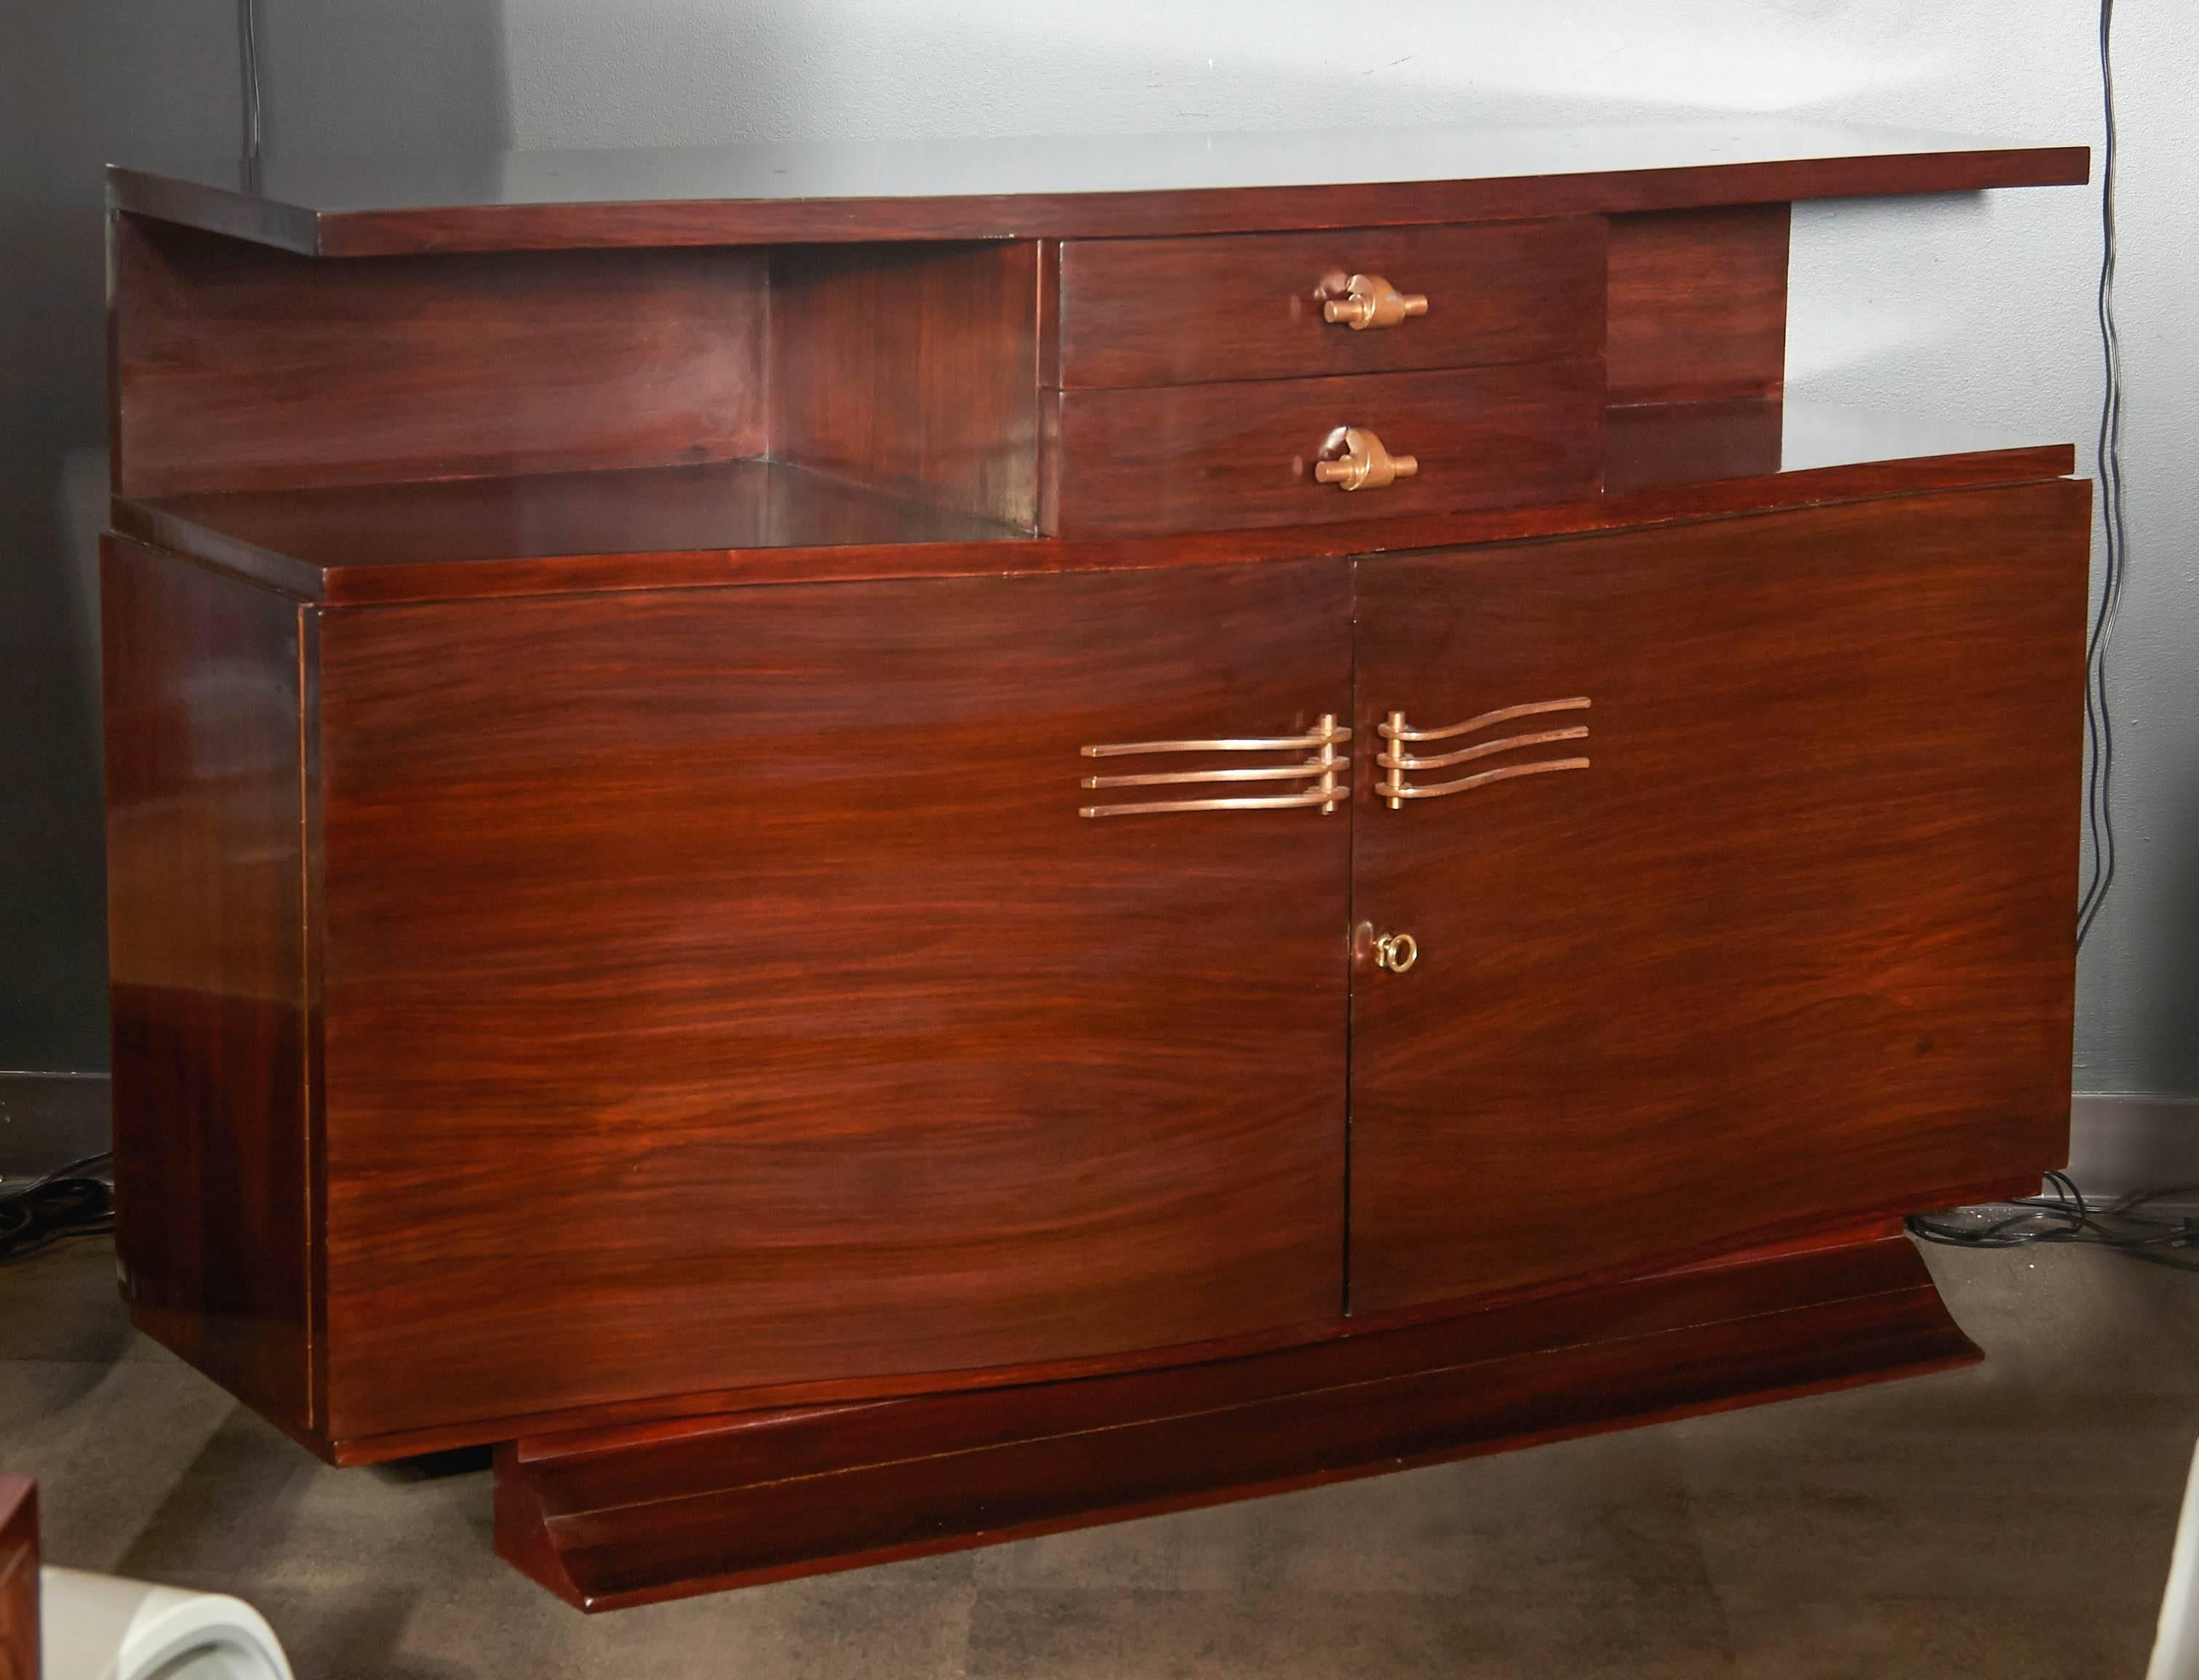 French Art Deco Rosewood Sideboard with Bow Fronted Design